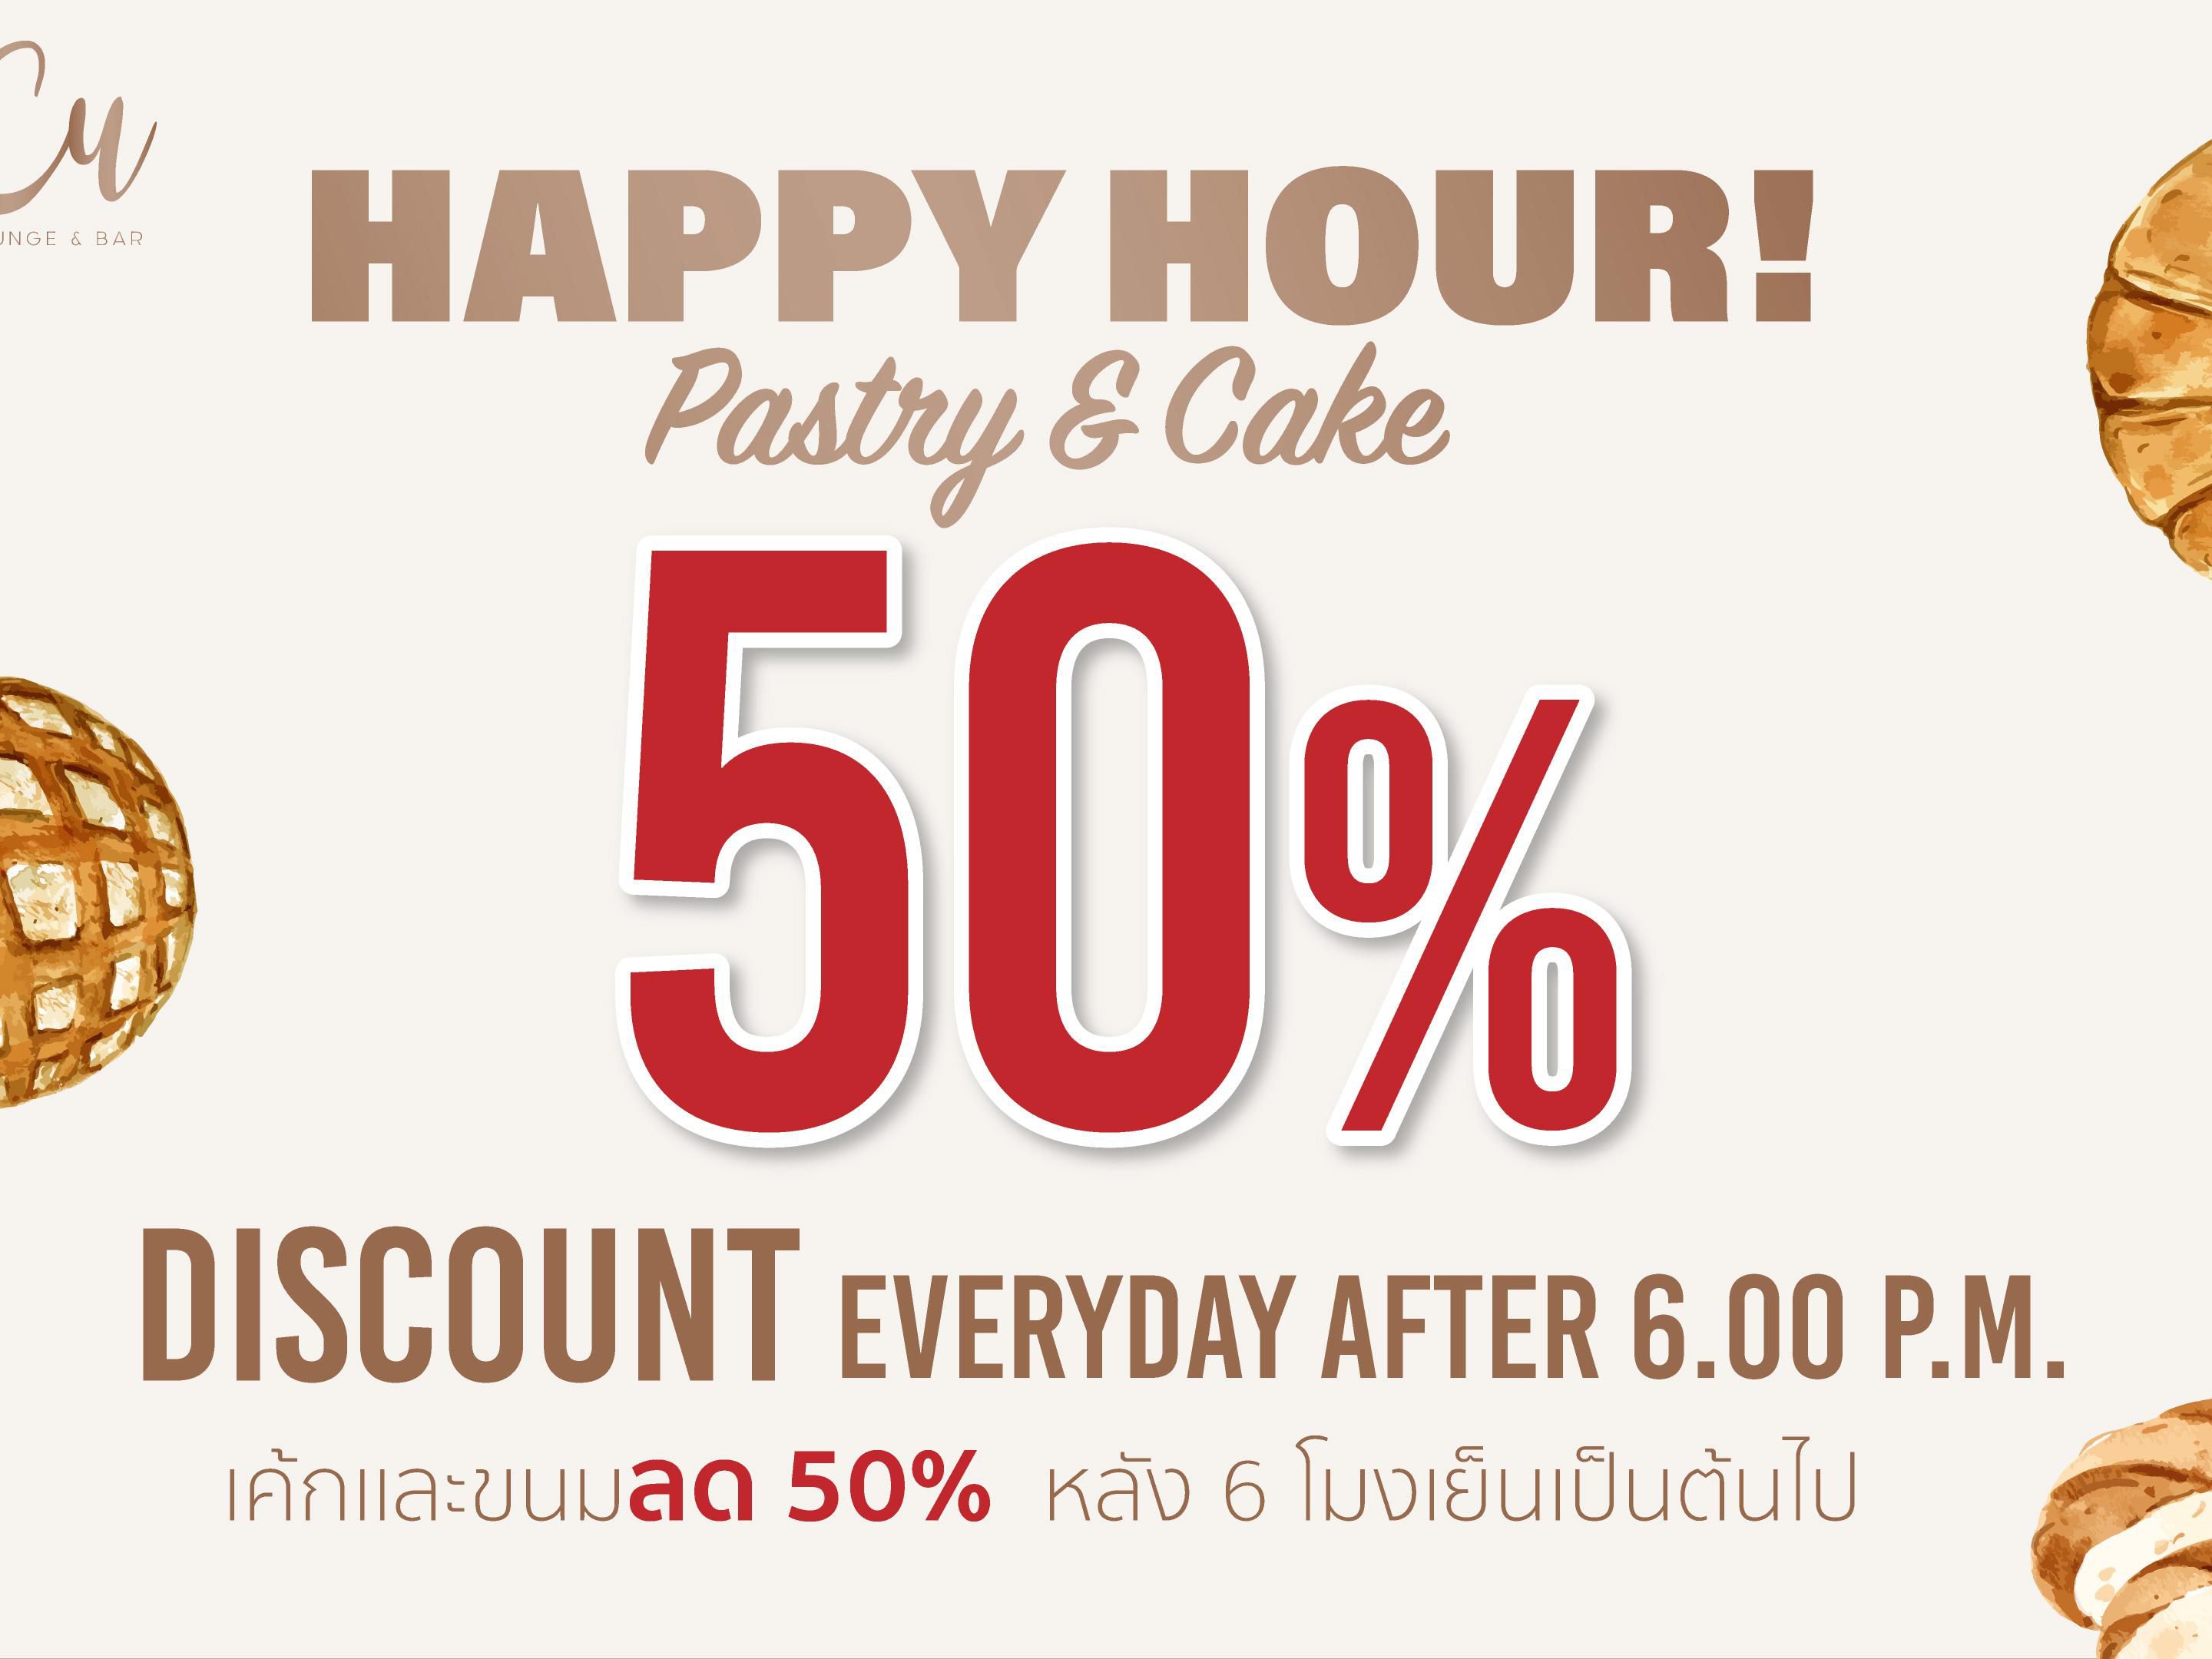 Happy hour at CU Lounge!